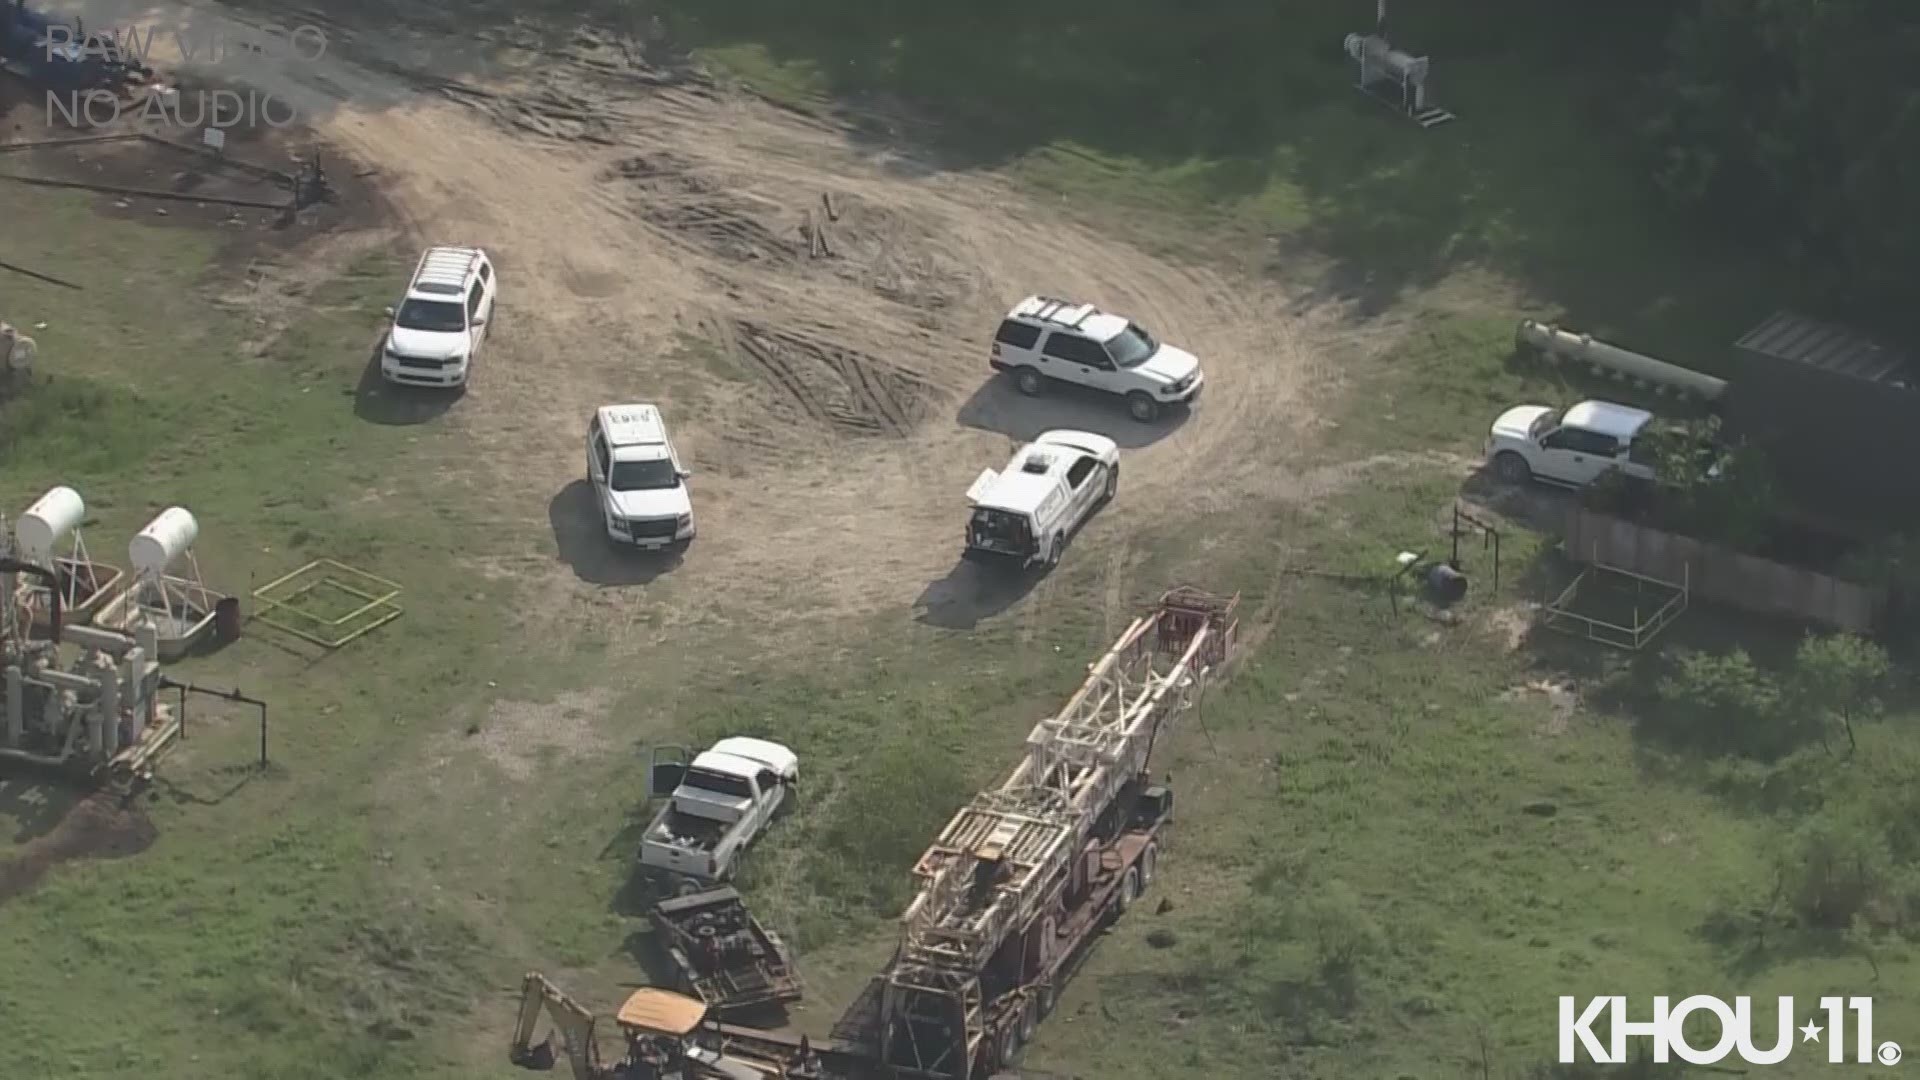 A worker was killed Wednesday when he was struck by part of an oil rig that had fallen in the Humble area, according to Harris County Sheriff Ed Gonzalez.